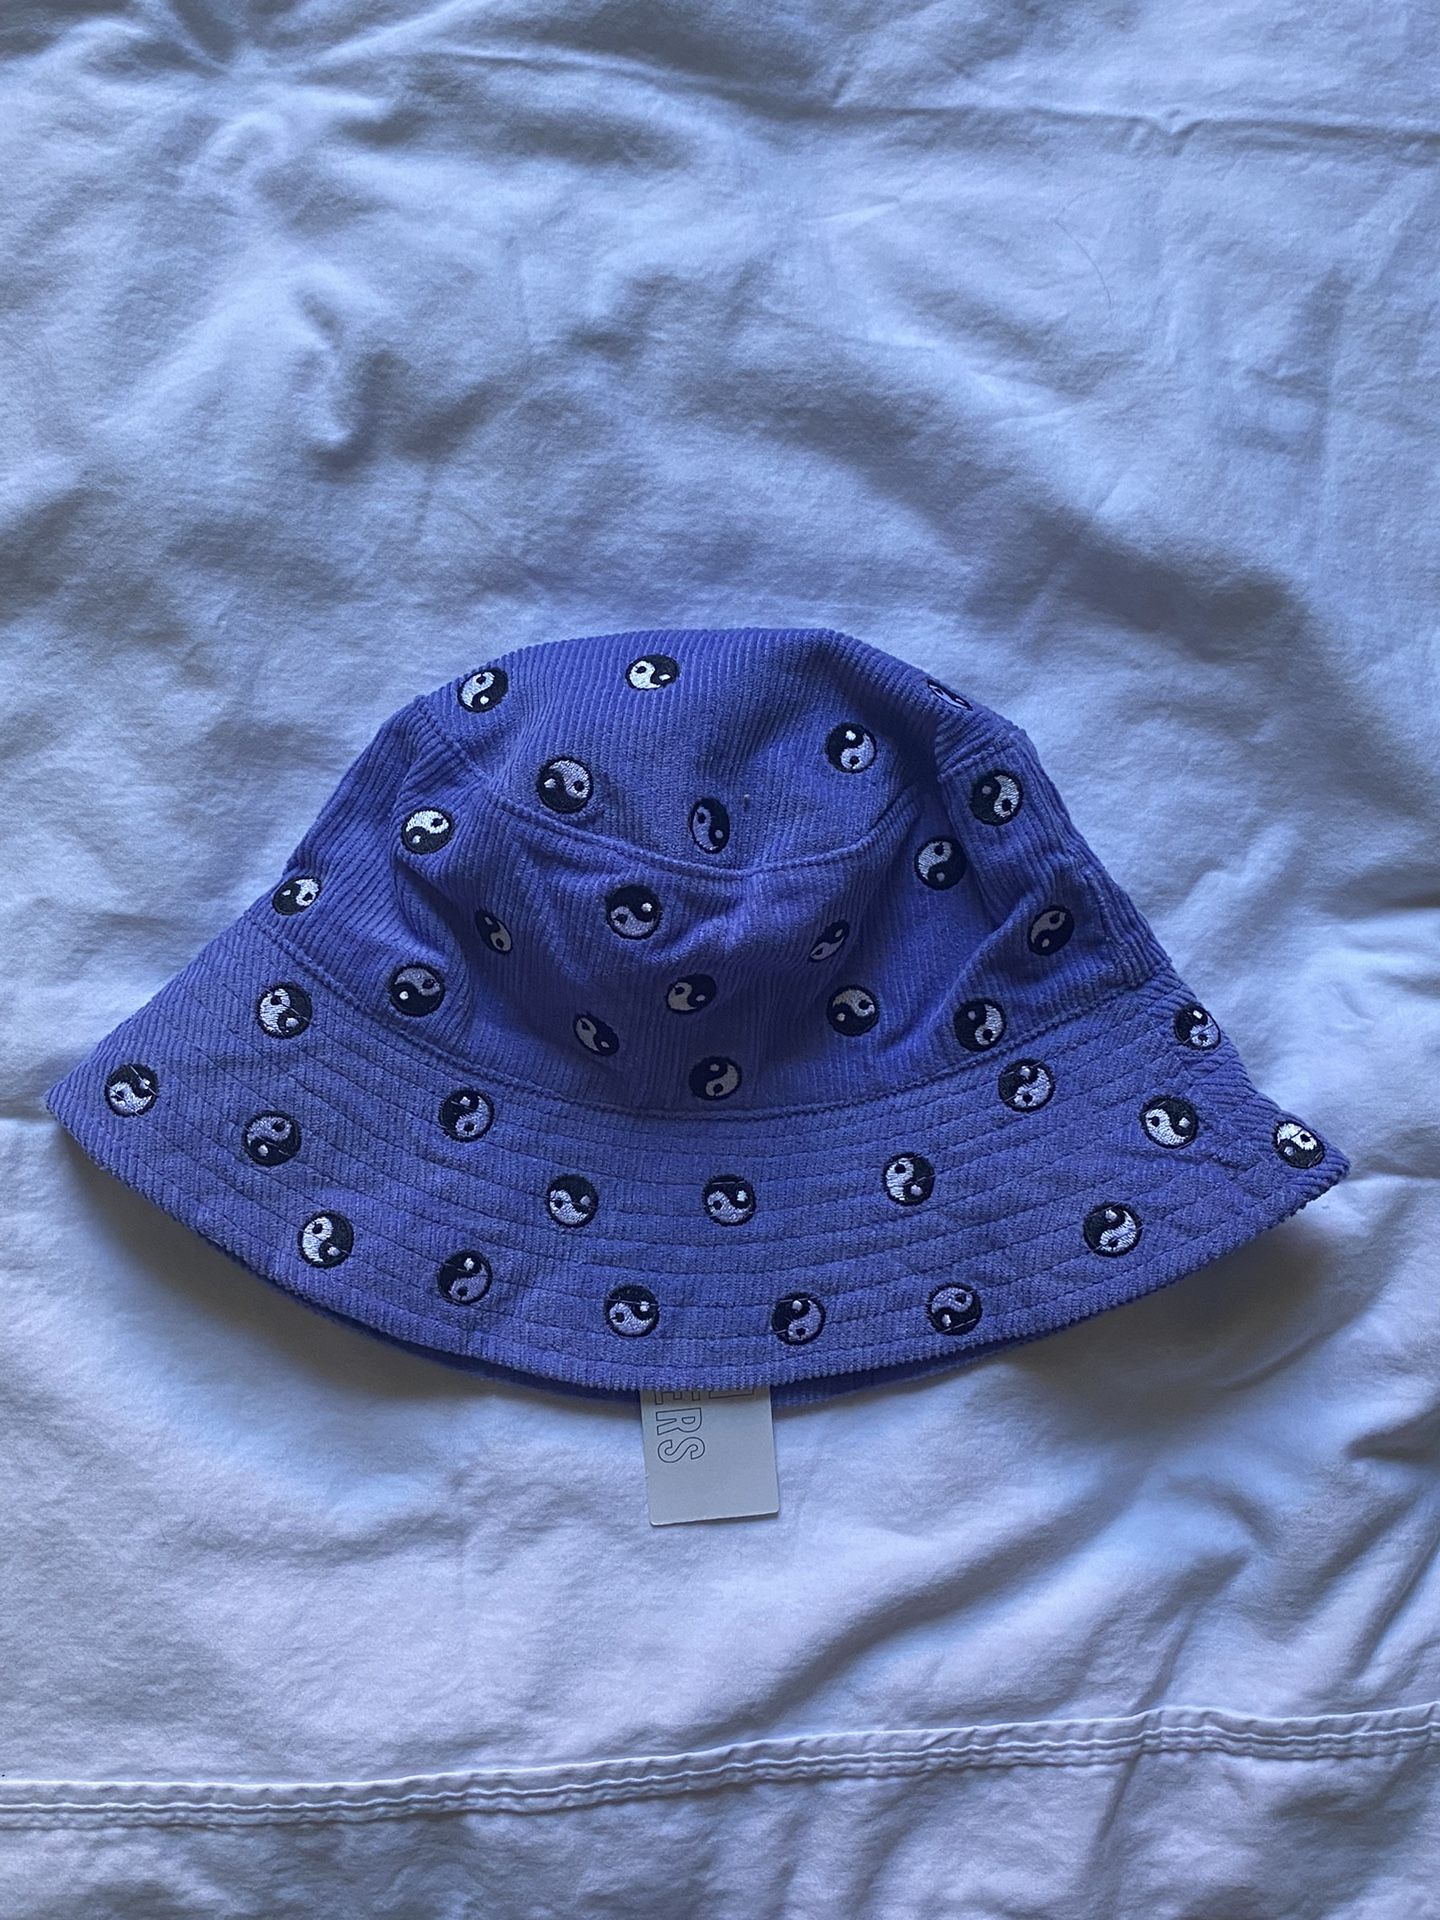 Y2K purple bucket hat with black and white yin yang design